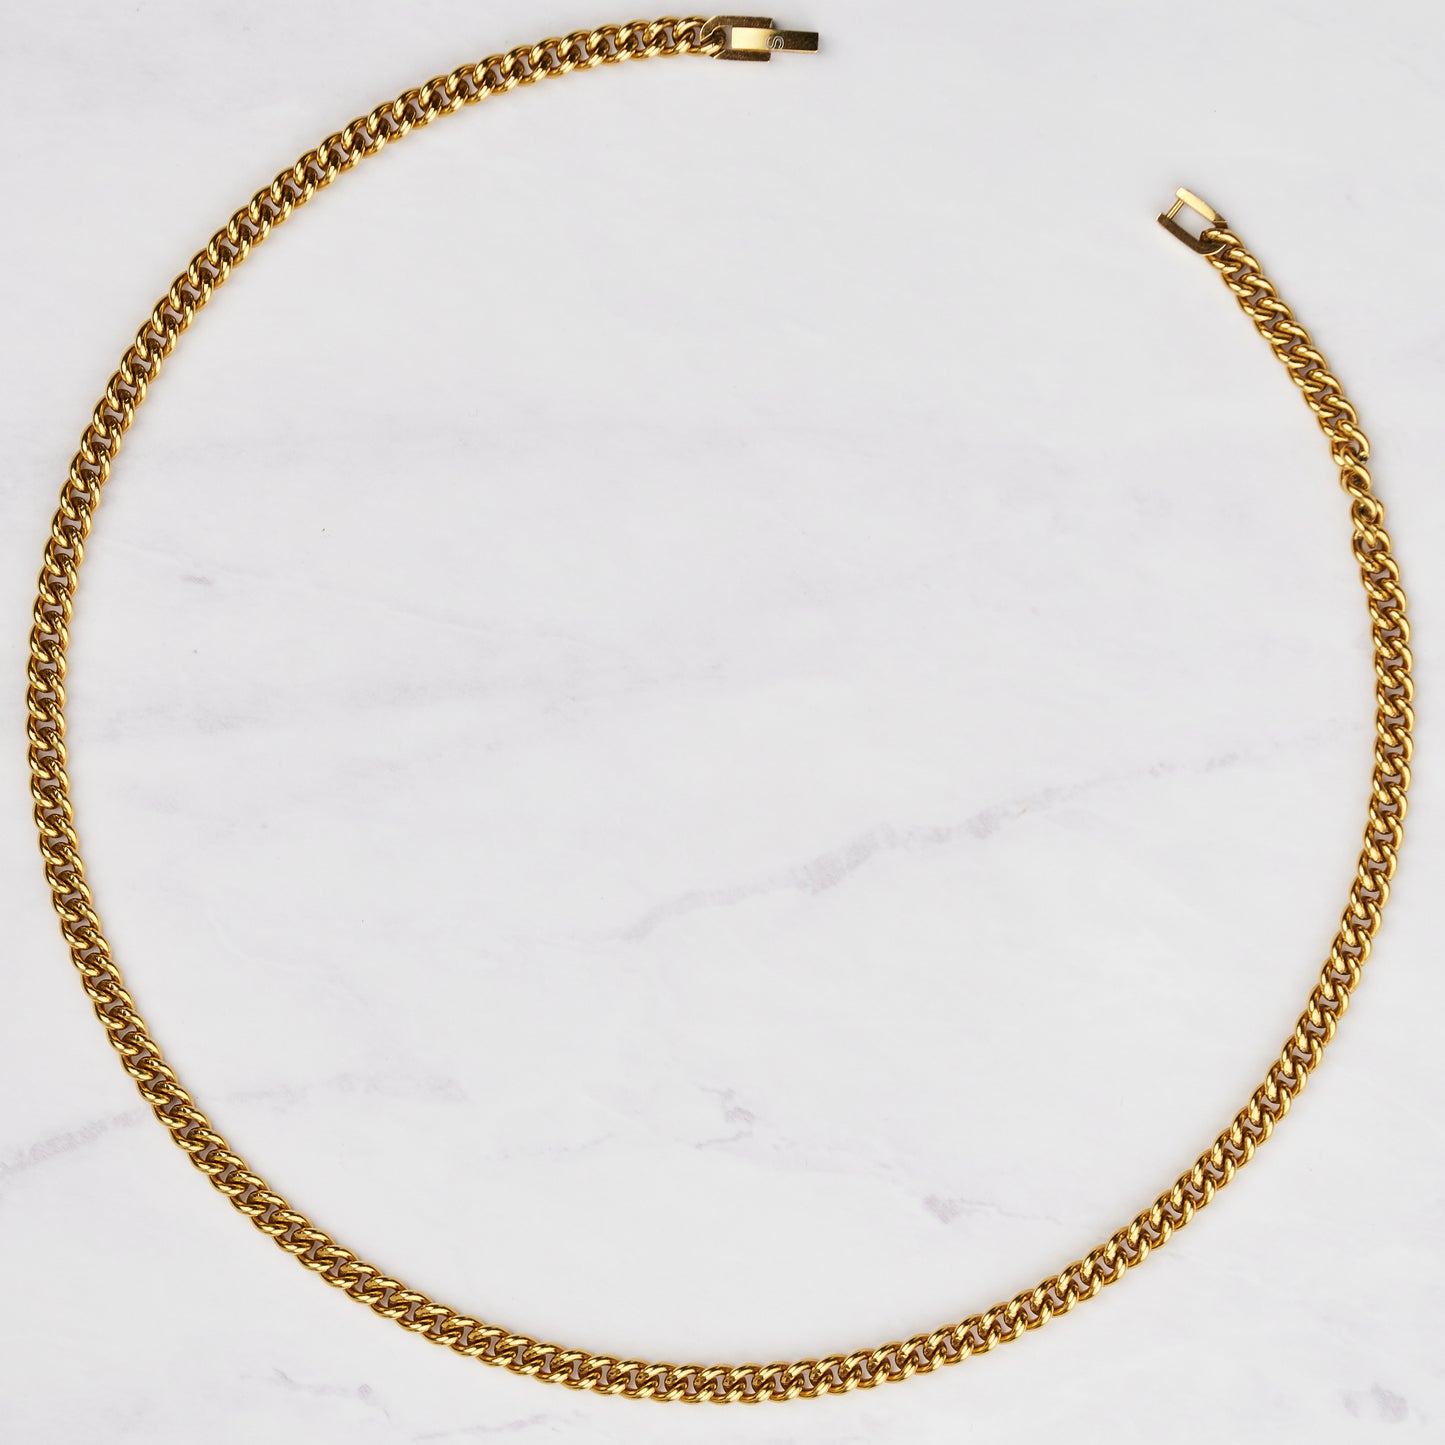 Victoria Necklace in Gold - 5mm